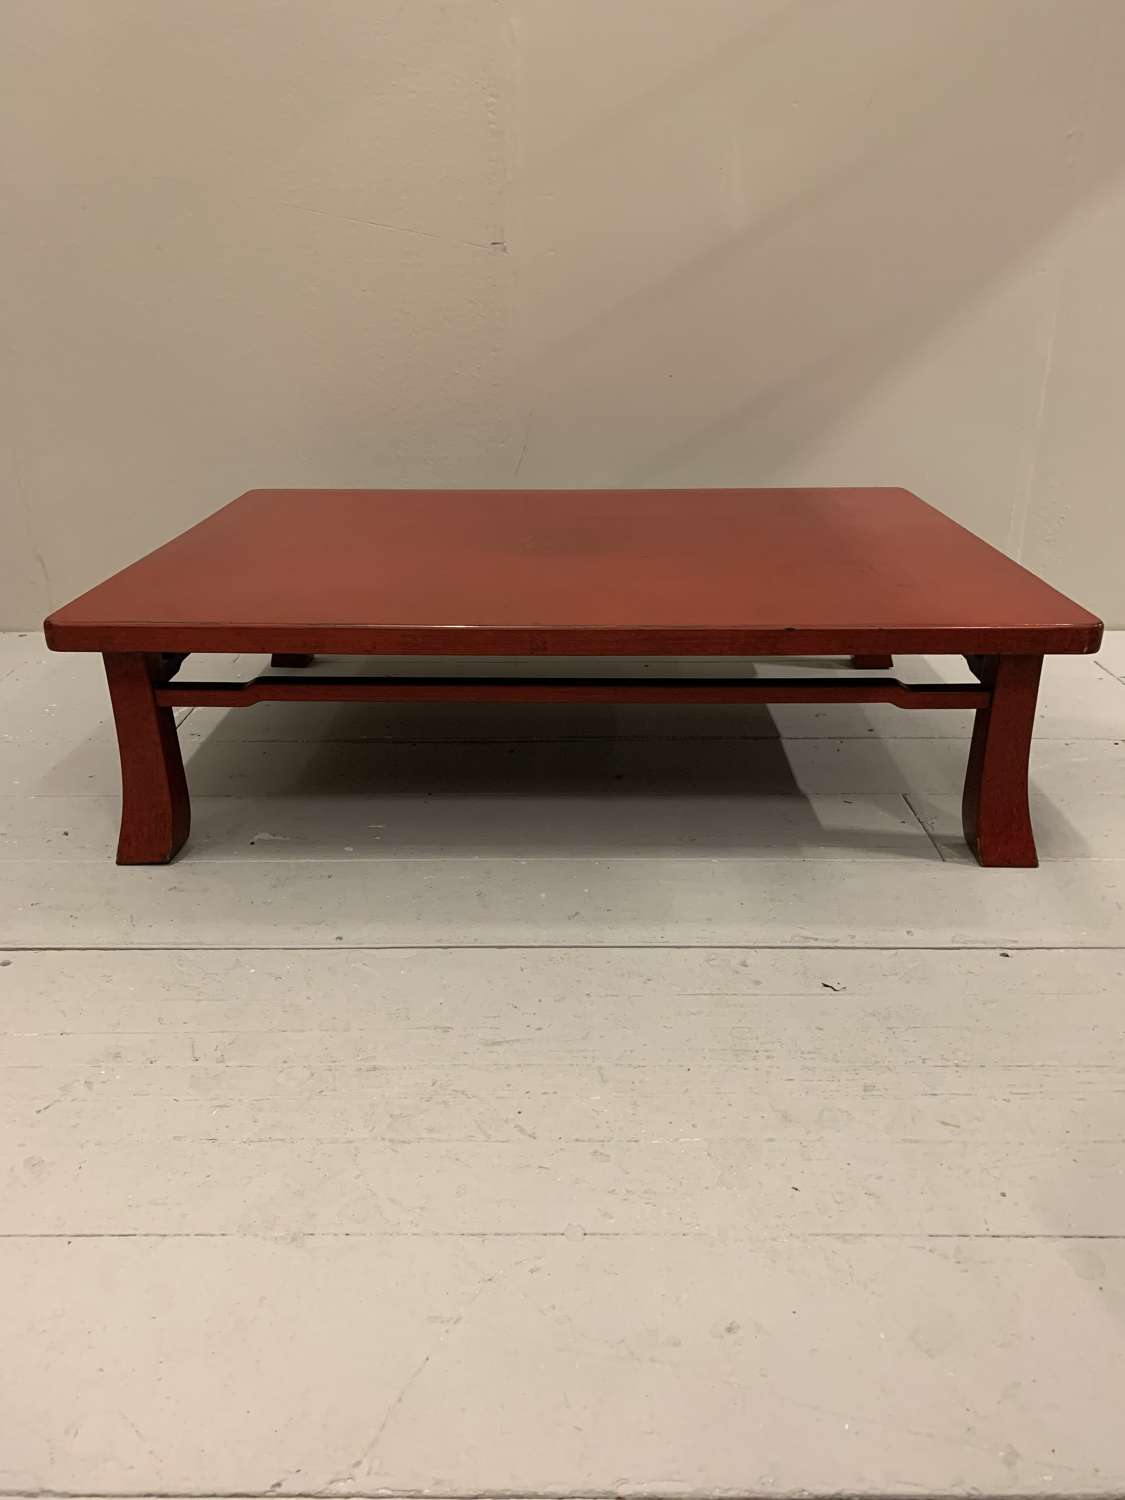 1920s red negora lacquer coffee table